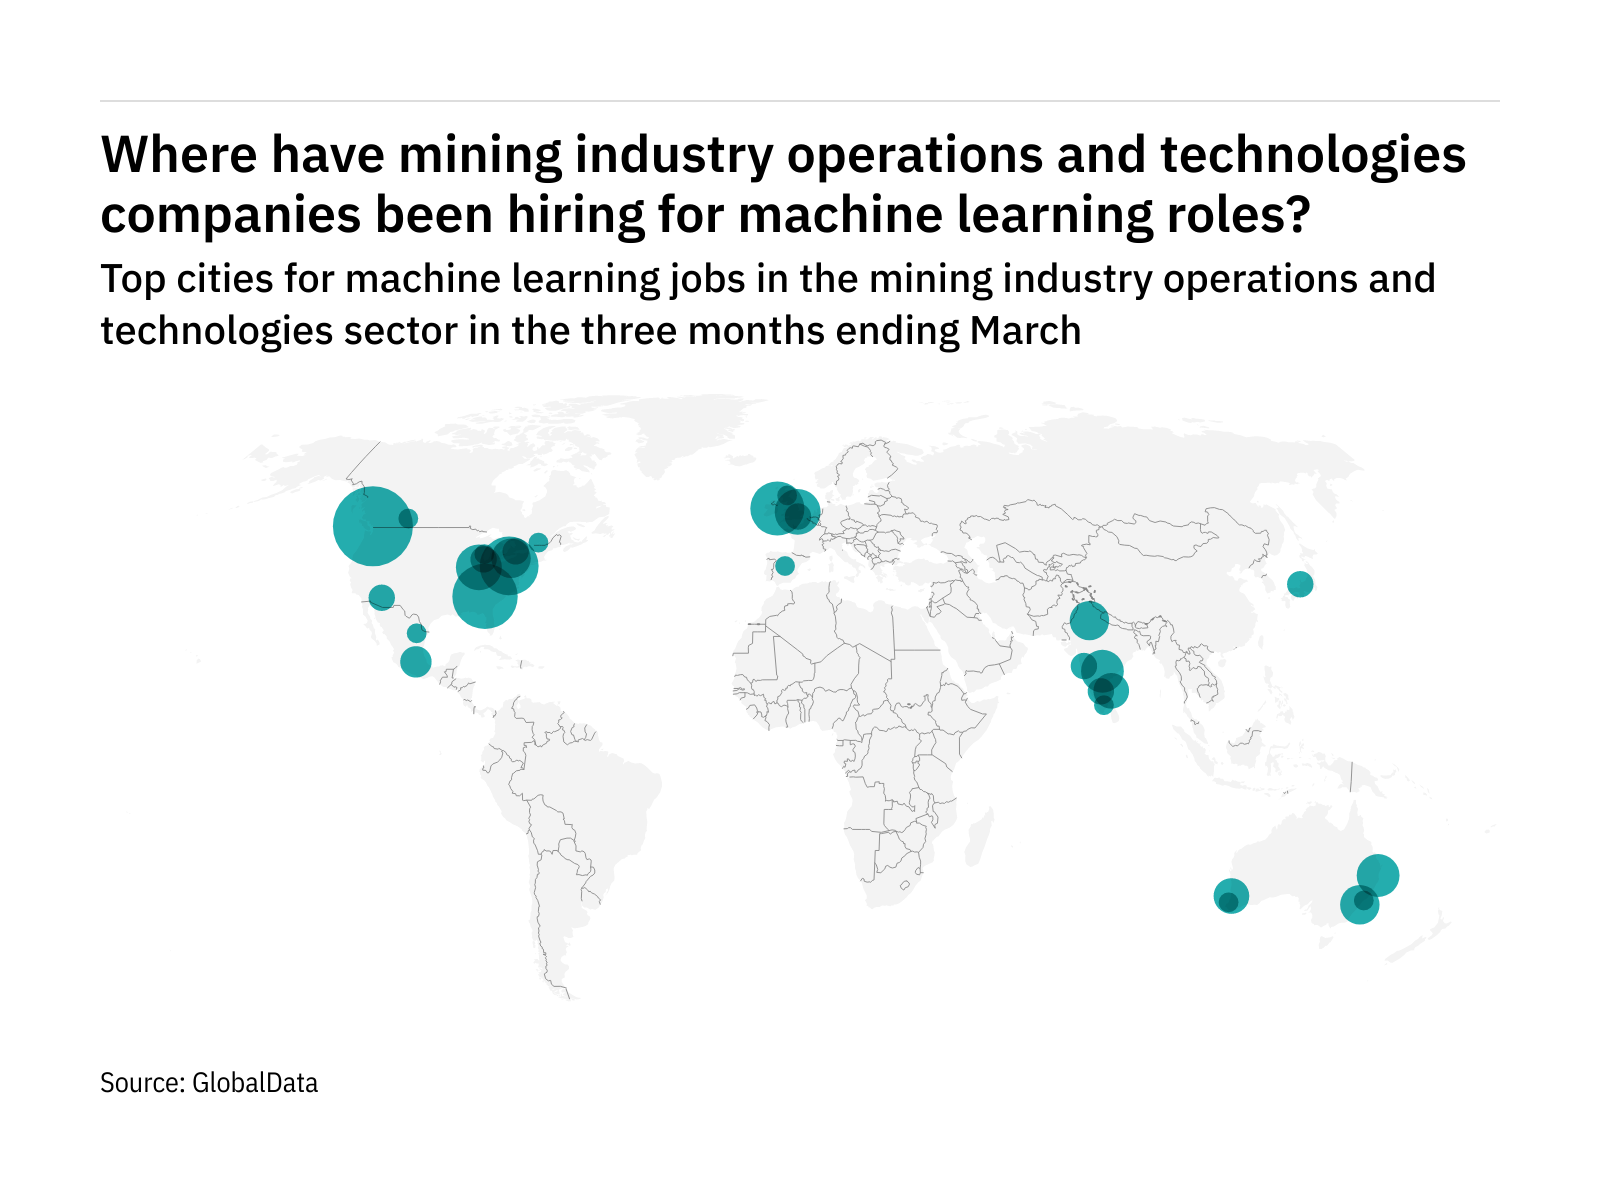 North America is seeing a hiring boom in mining industry machine learning roles